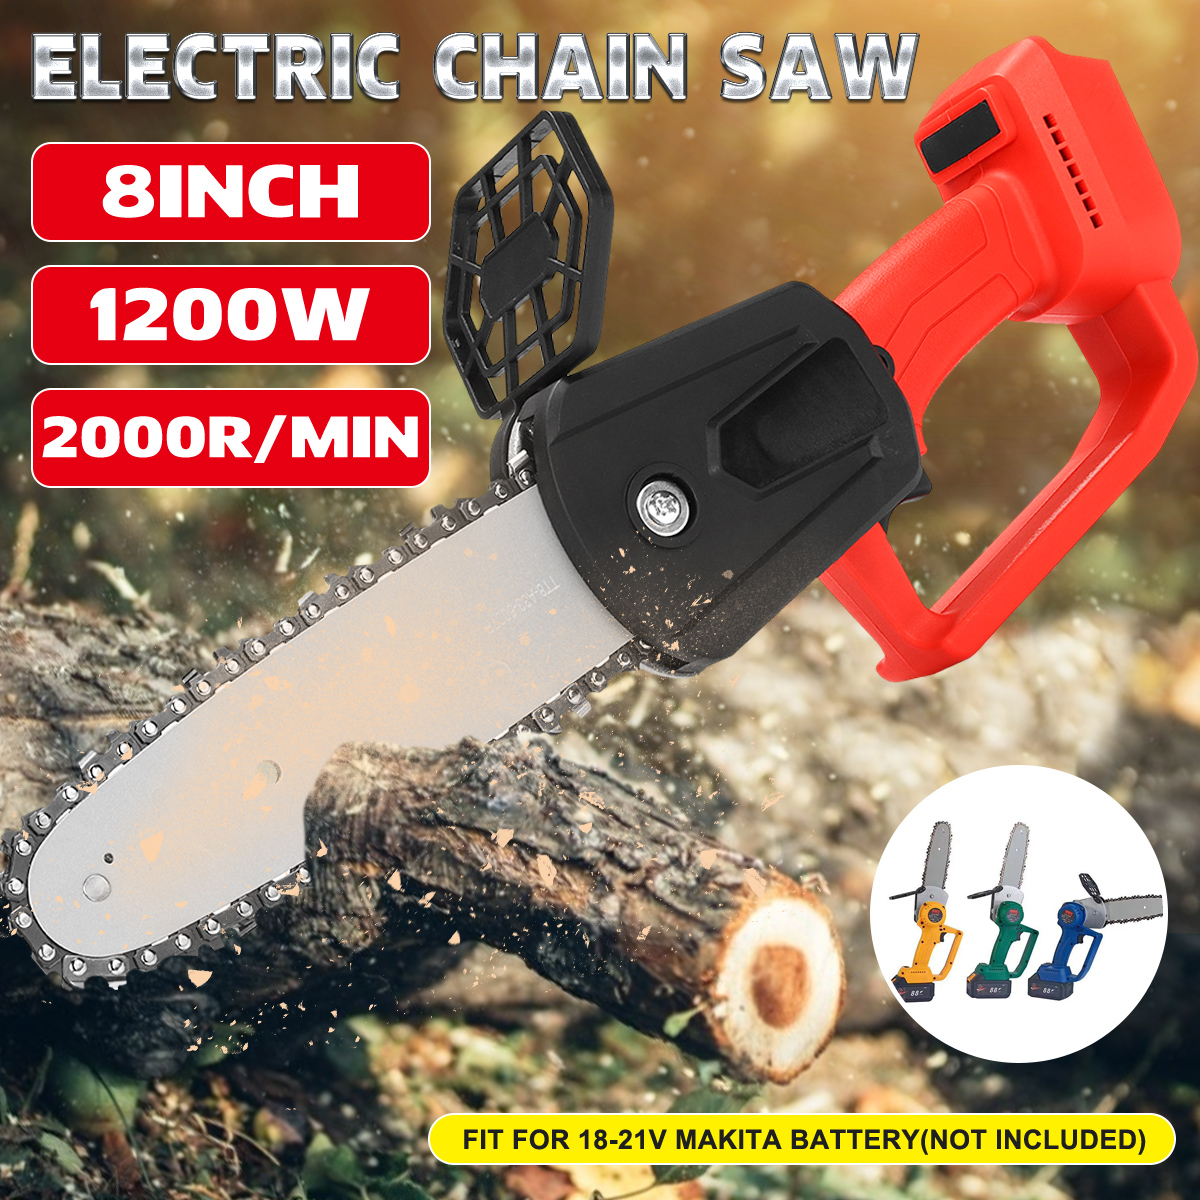 1200W-Electric-Cordless-Chainsaw-Chain-Saw-Multi-function-Wood-Cutting-Tool-For-Makita-18-21V-Batter-1771569-2